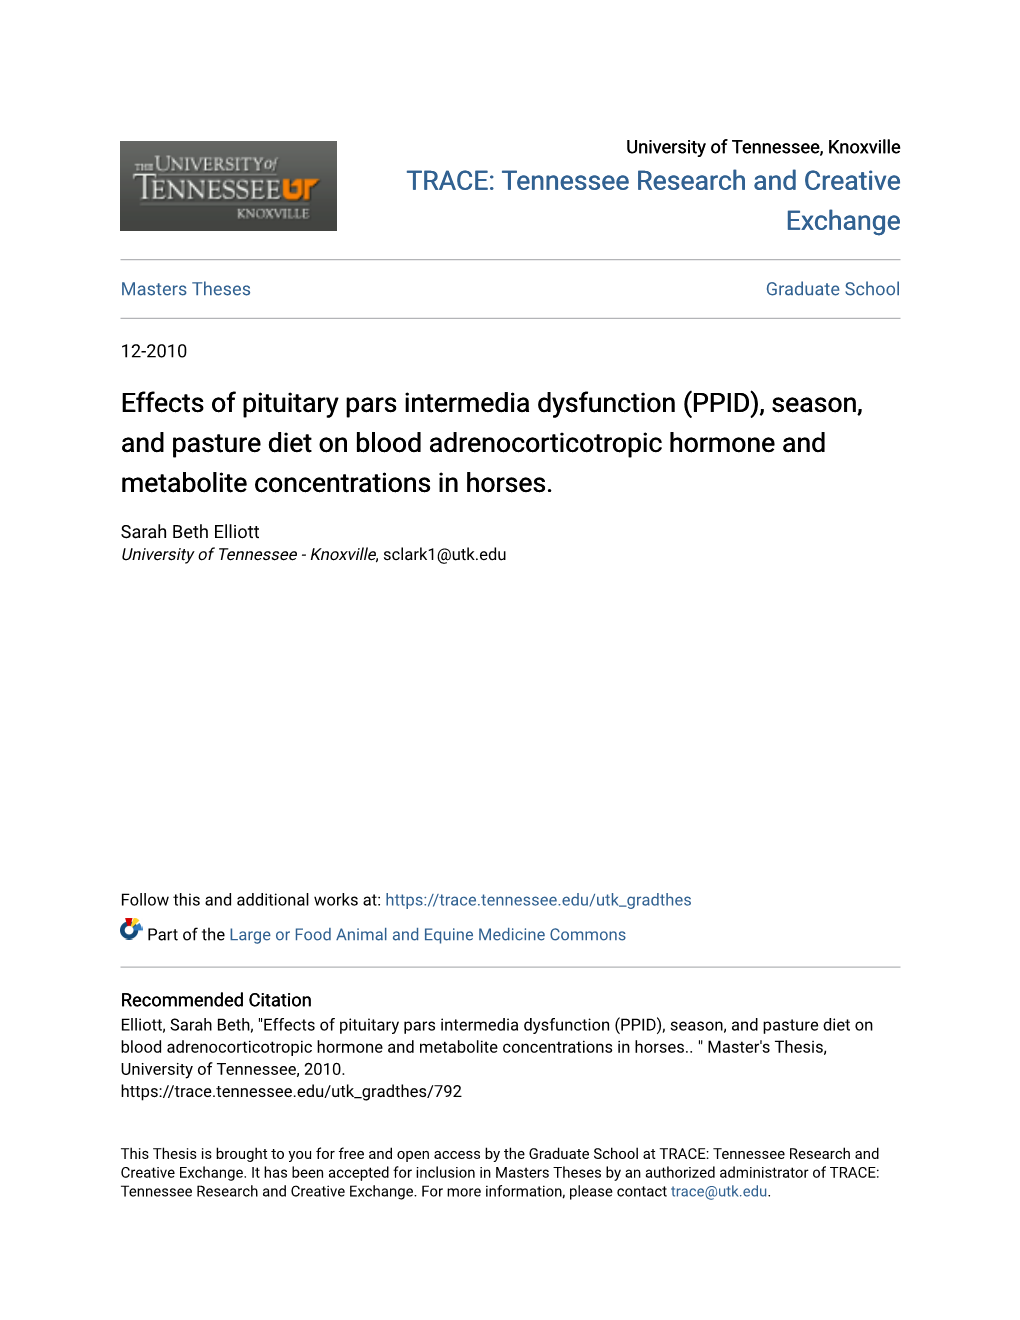 PPID), Season, and Pasture Diet on Blood Adrenocorticotropic Hormone and Metabolite Concentrations in Horses